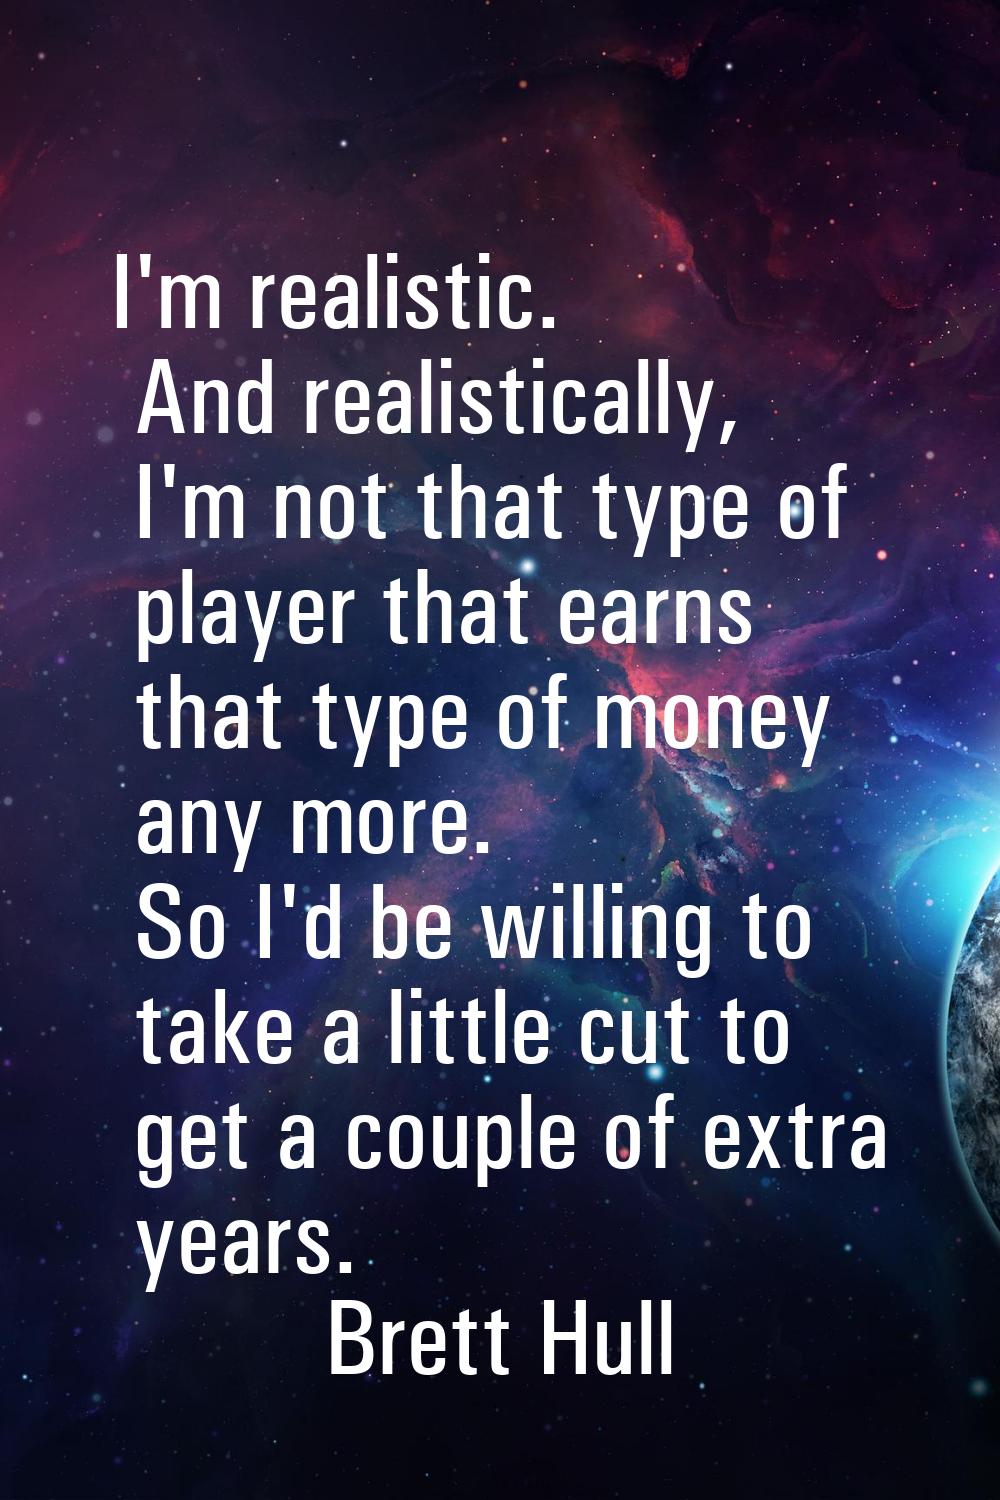 I'm realistic. And realistically, I'm not that type of player that earns that type of money any mor